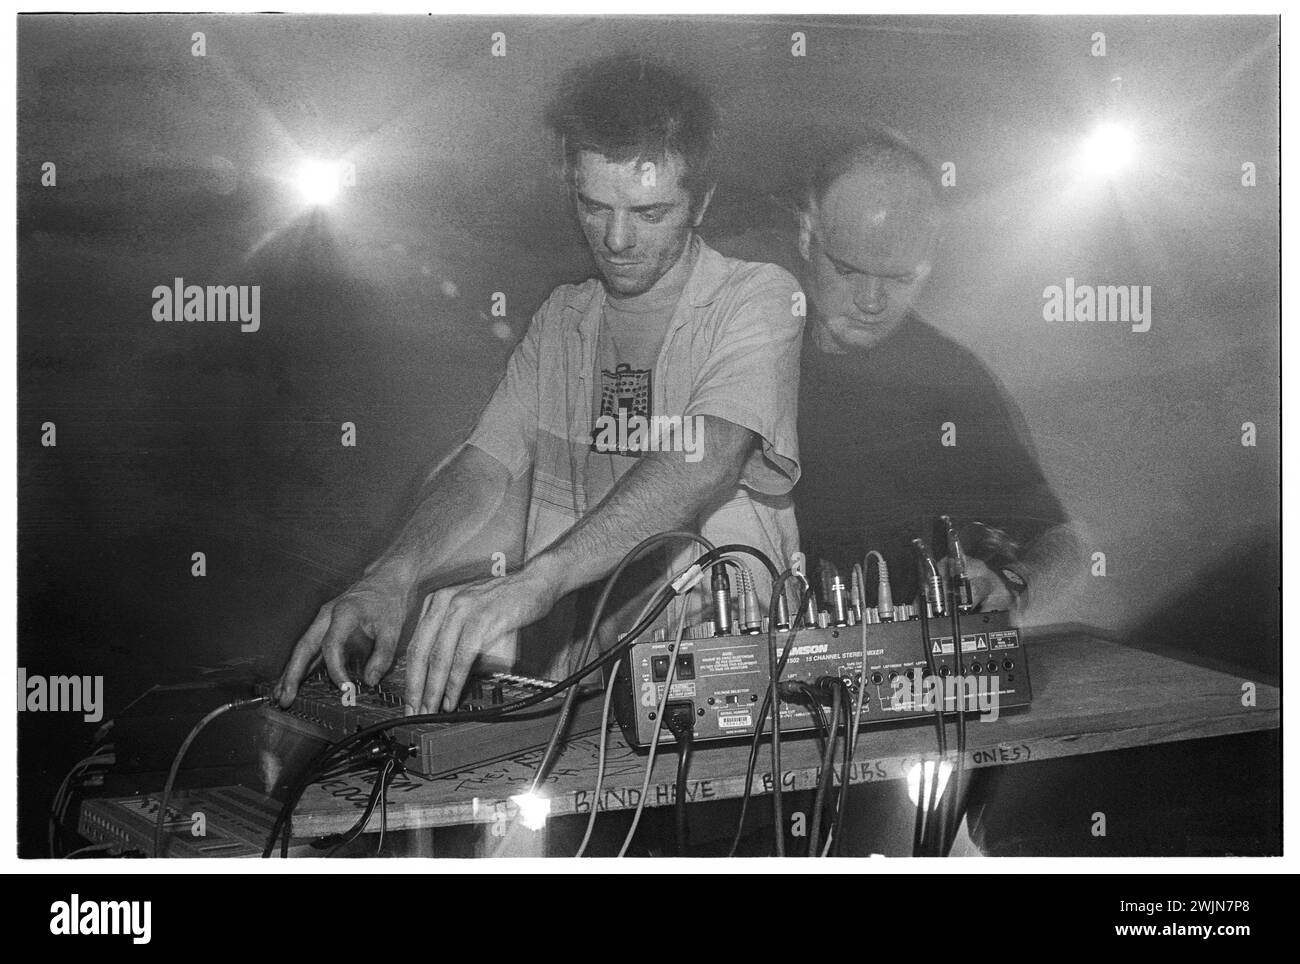 AUDIO AIR STRIKE, WELSH CLUB, 1996: Welsh DJ and techno band Audio Air Strike – real name Richard Hawkins – photographed at Clwb Ifor Back in Cardiff in January 1996. Photo: Rob Watkins. Stock Photo